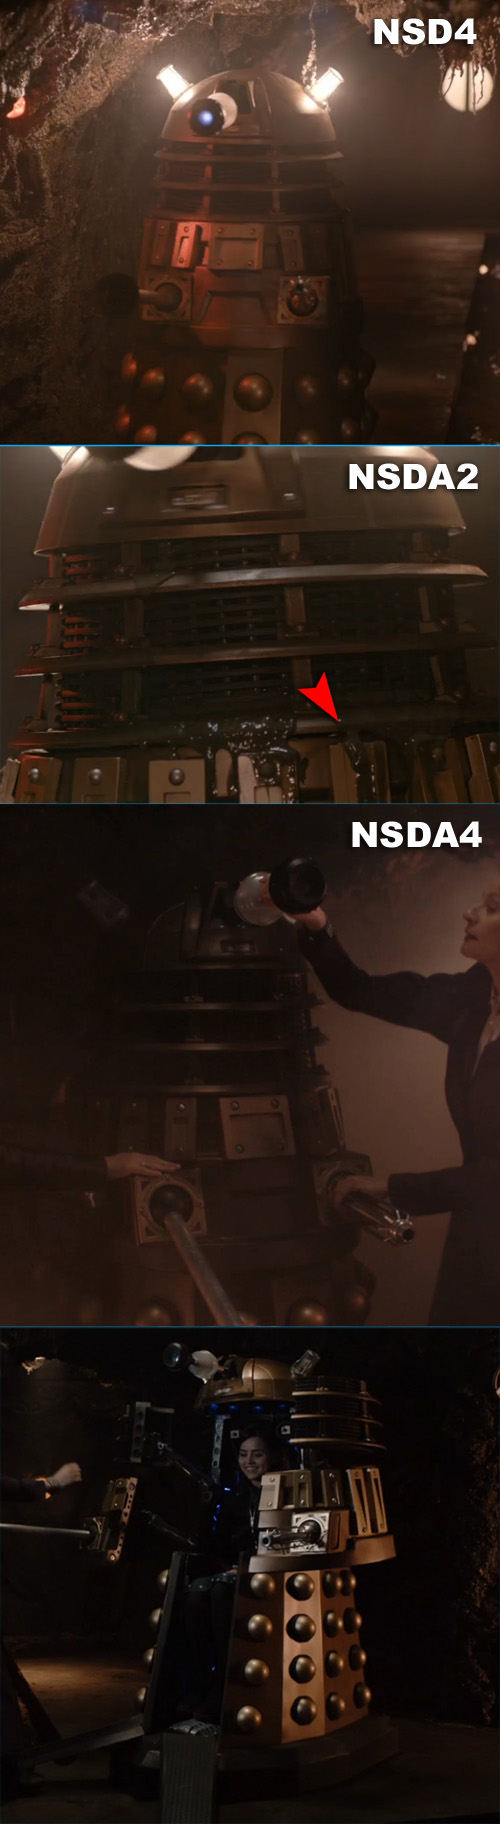 The four props used for one Dalek